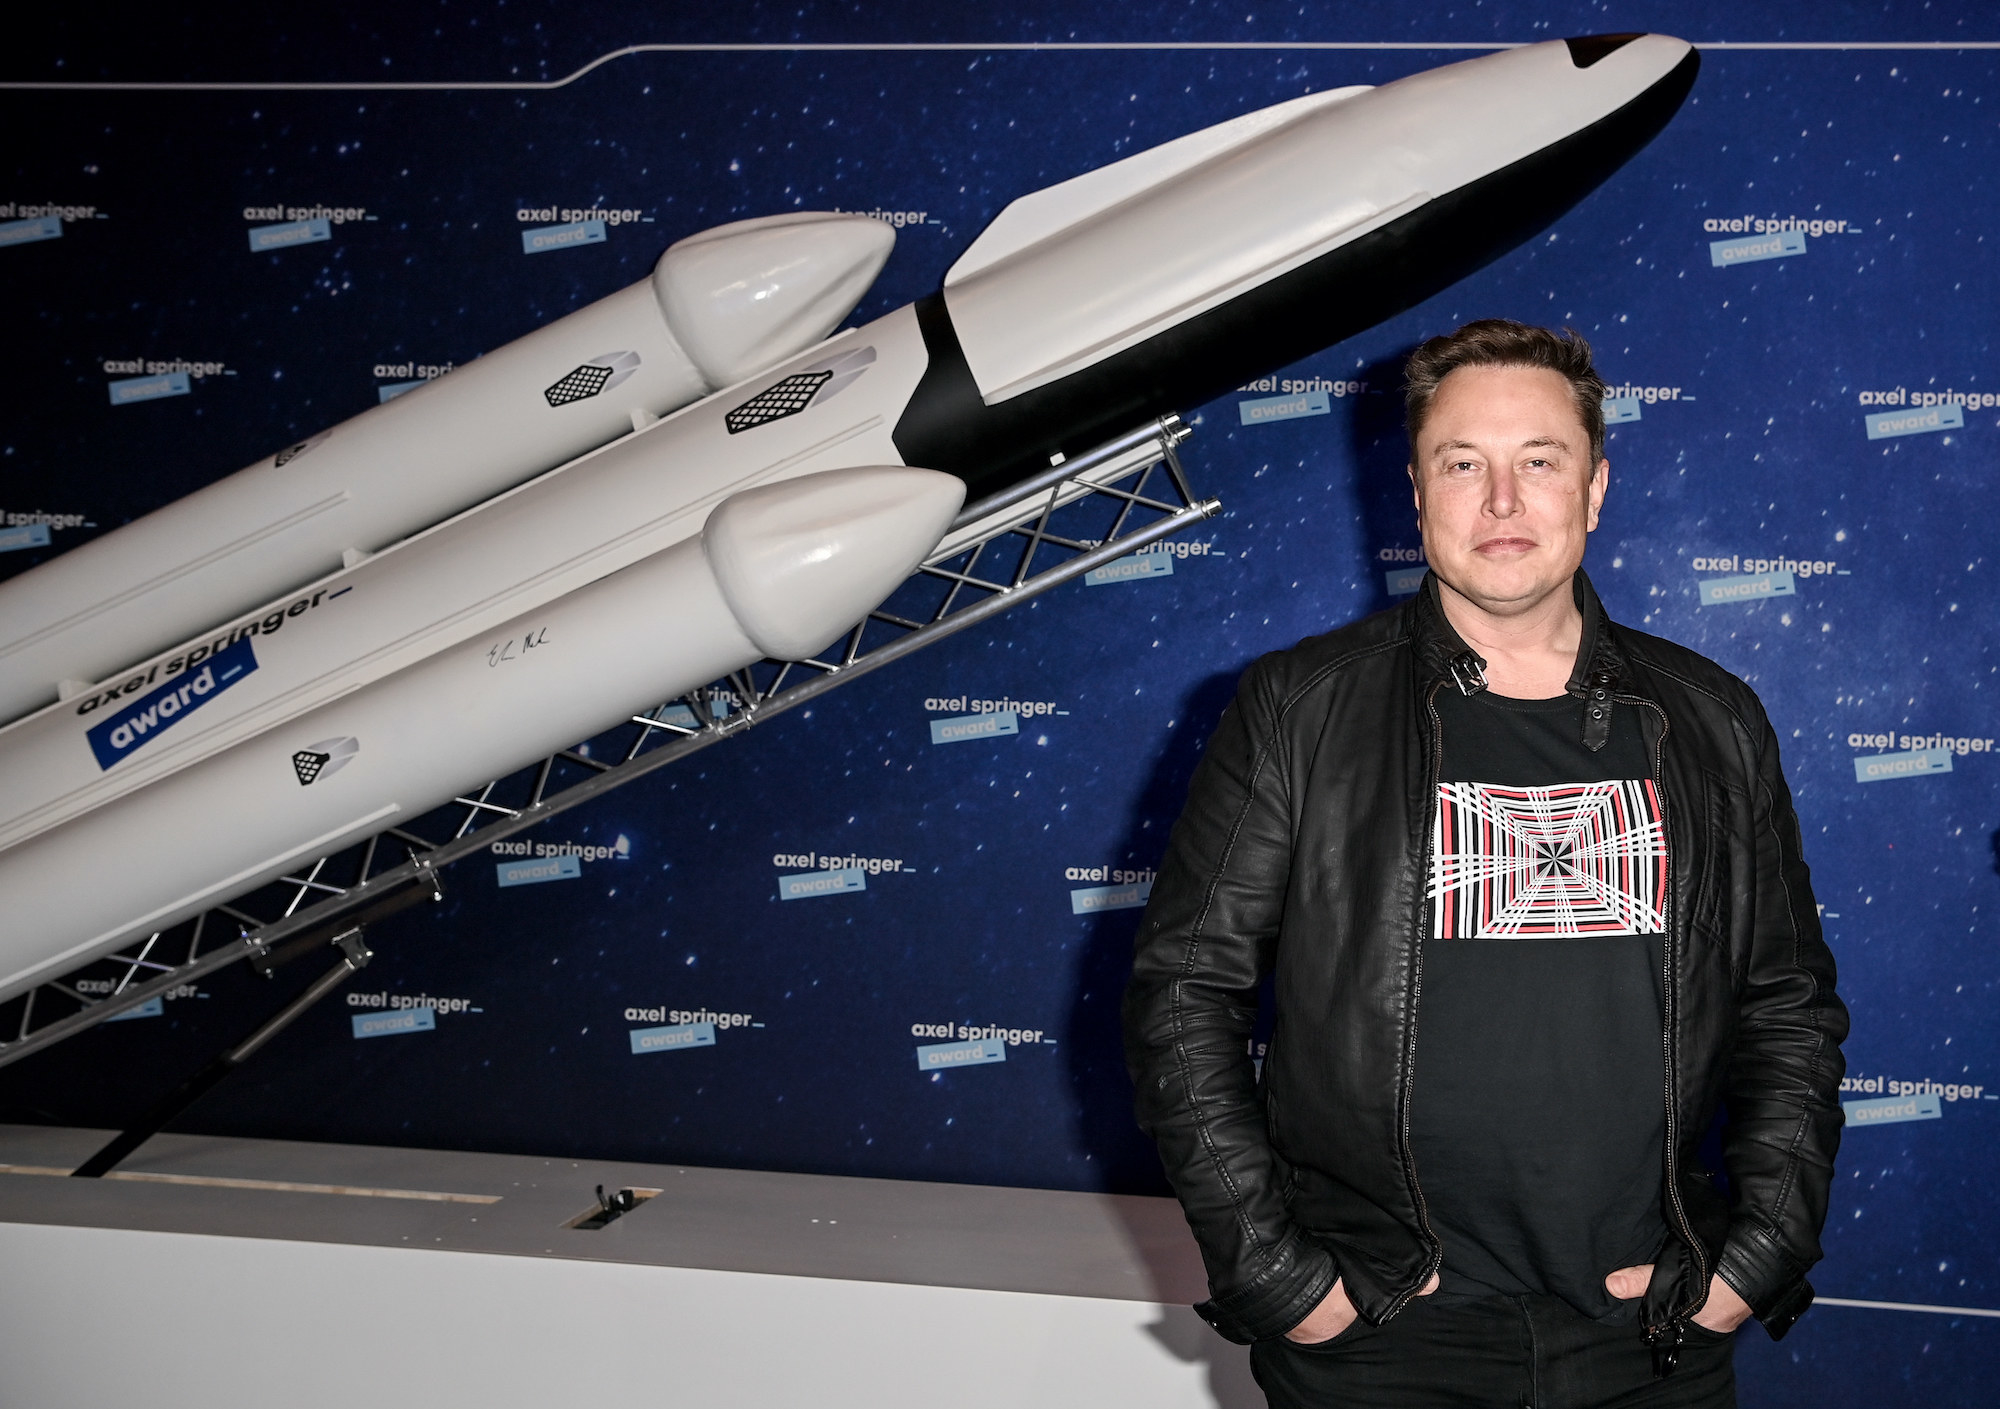 Musk on the red carpet of the Axel Springer Award in Berlin